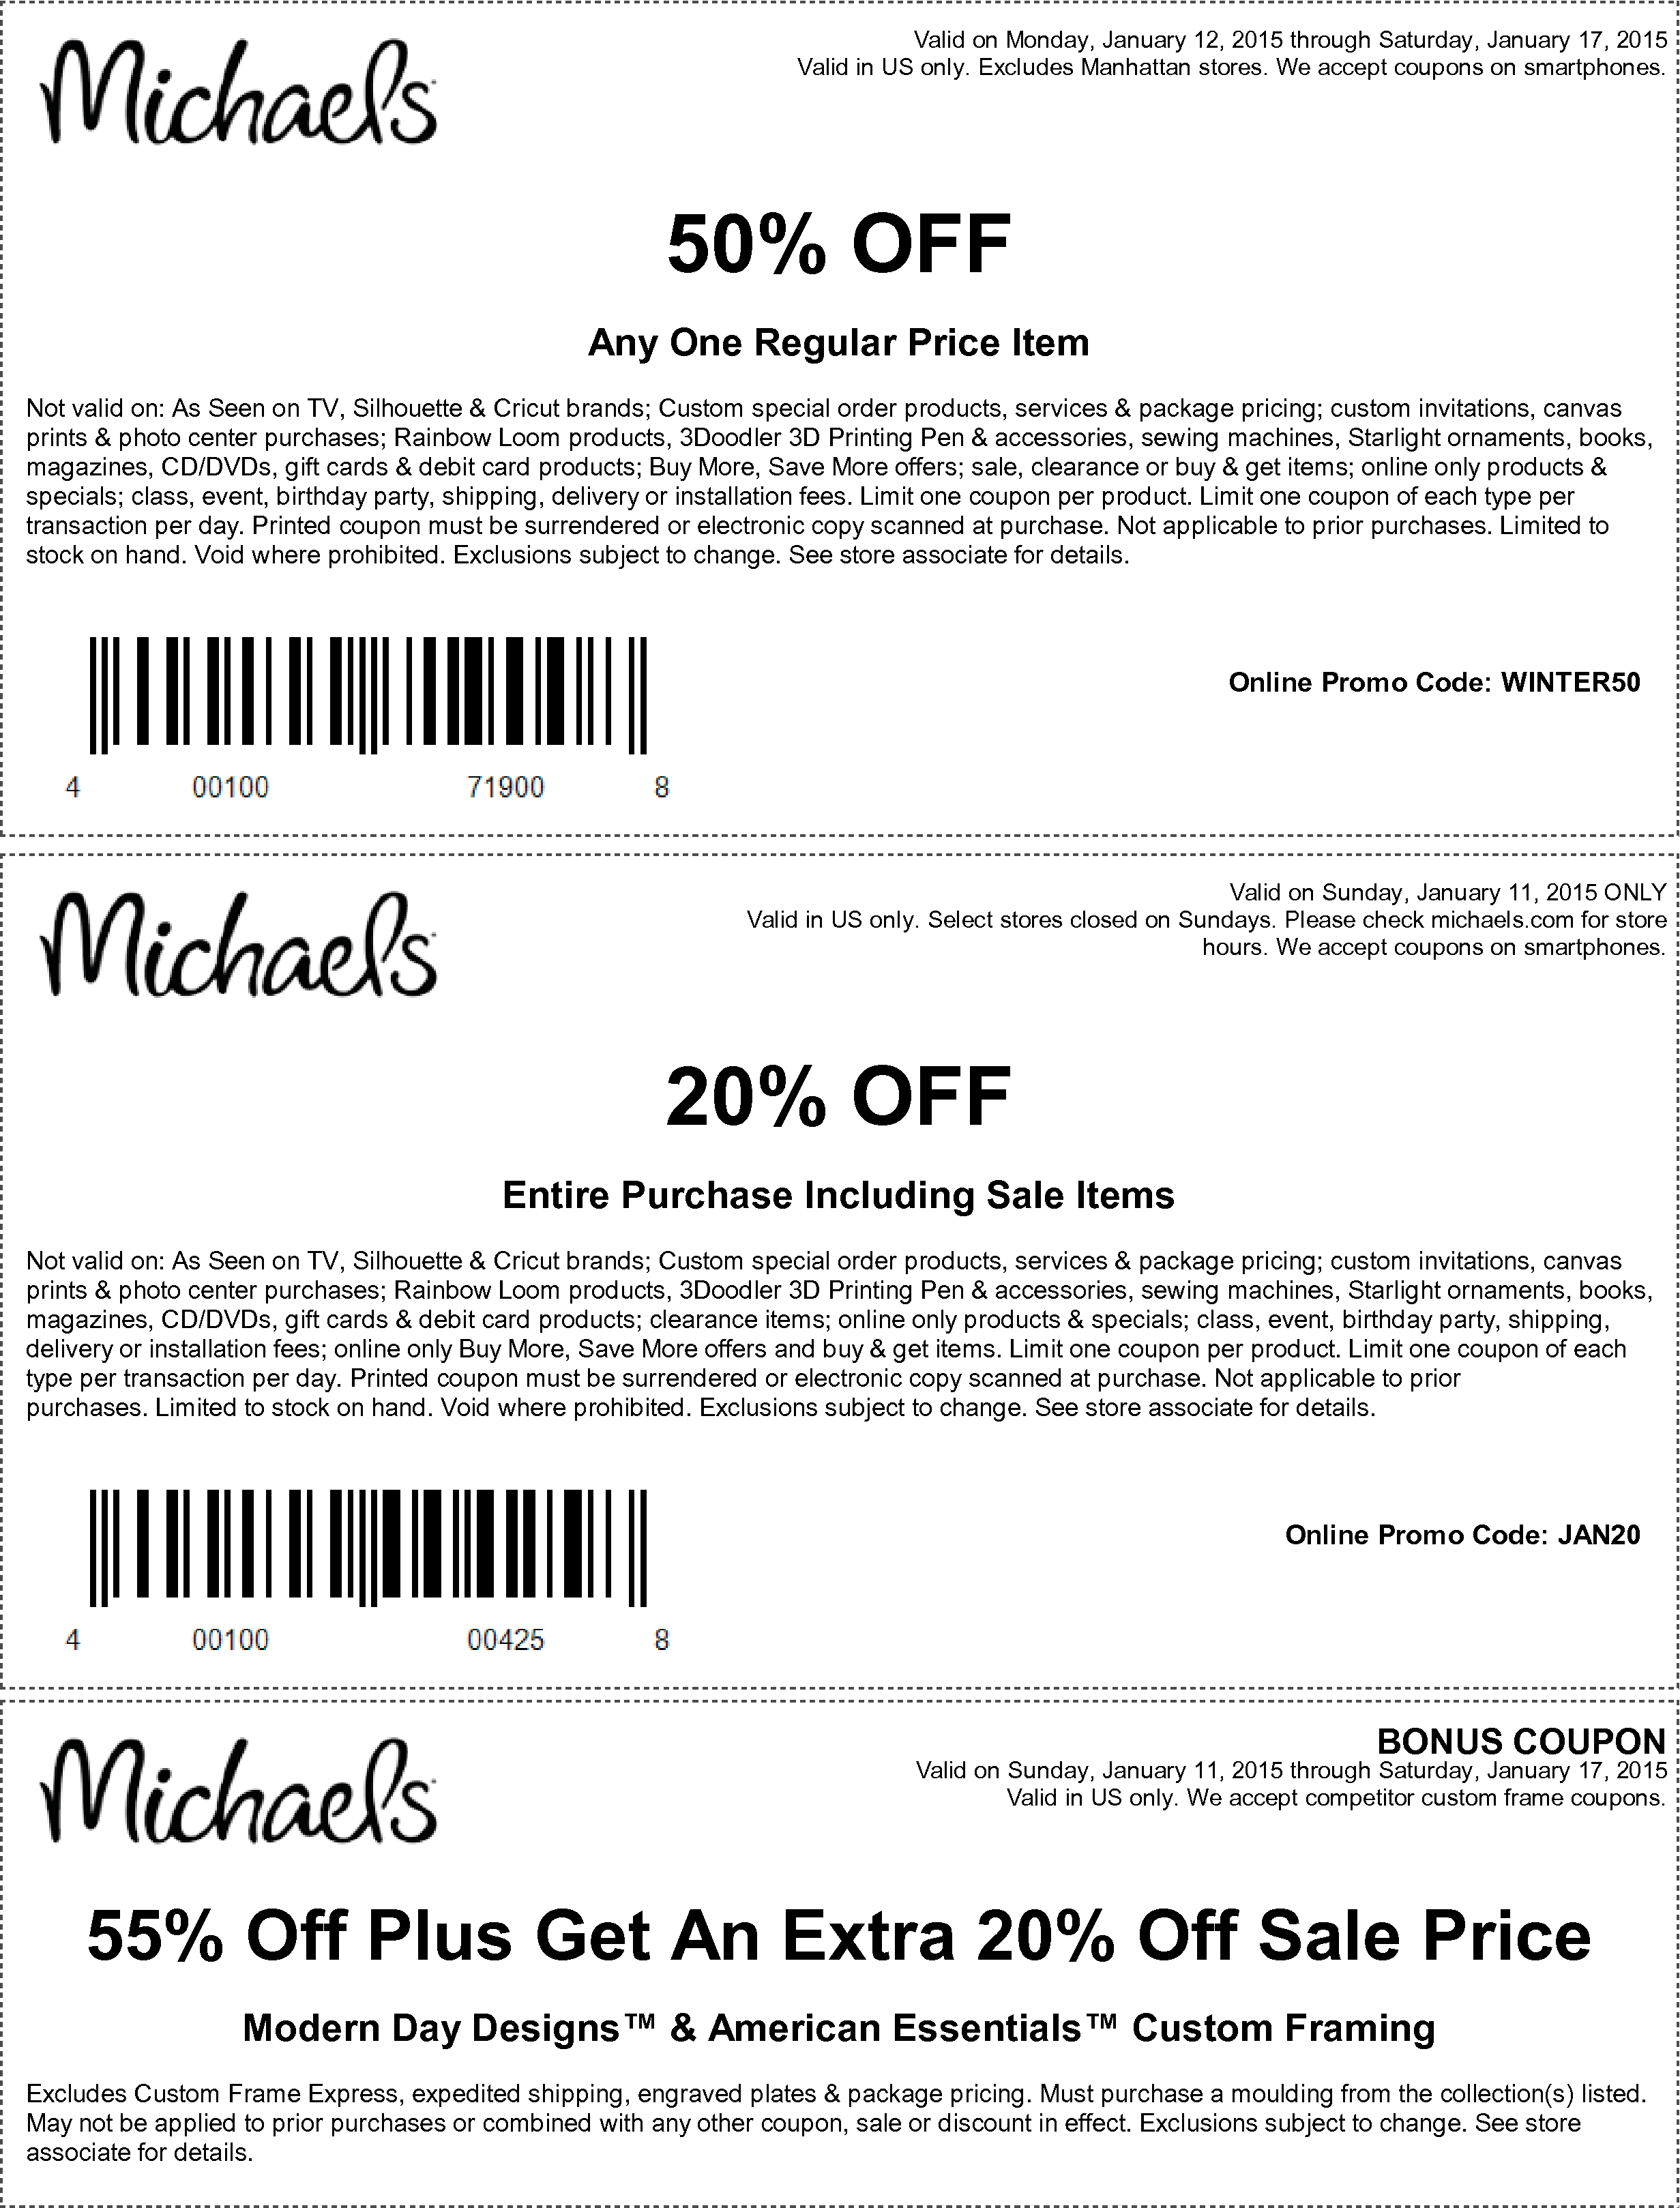 michaels-coupons-50-off-a-single-item-more-at